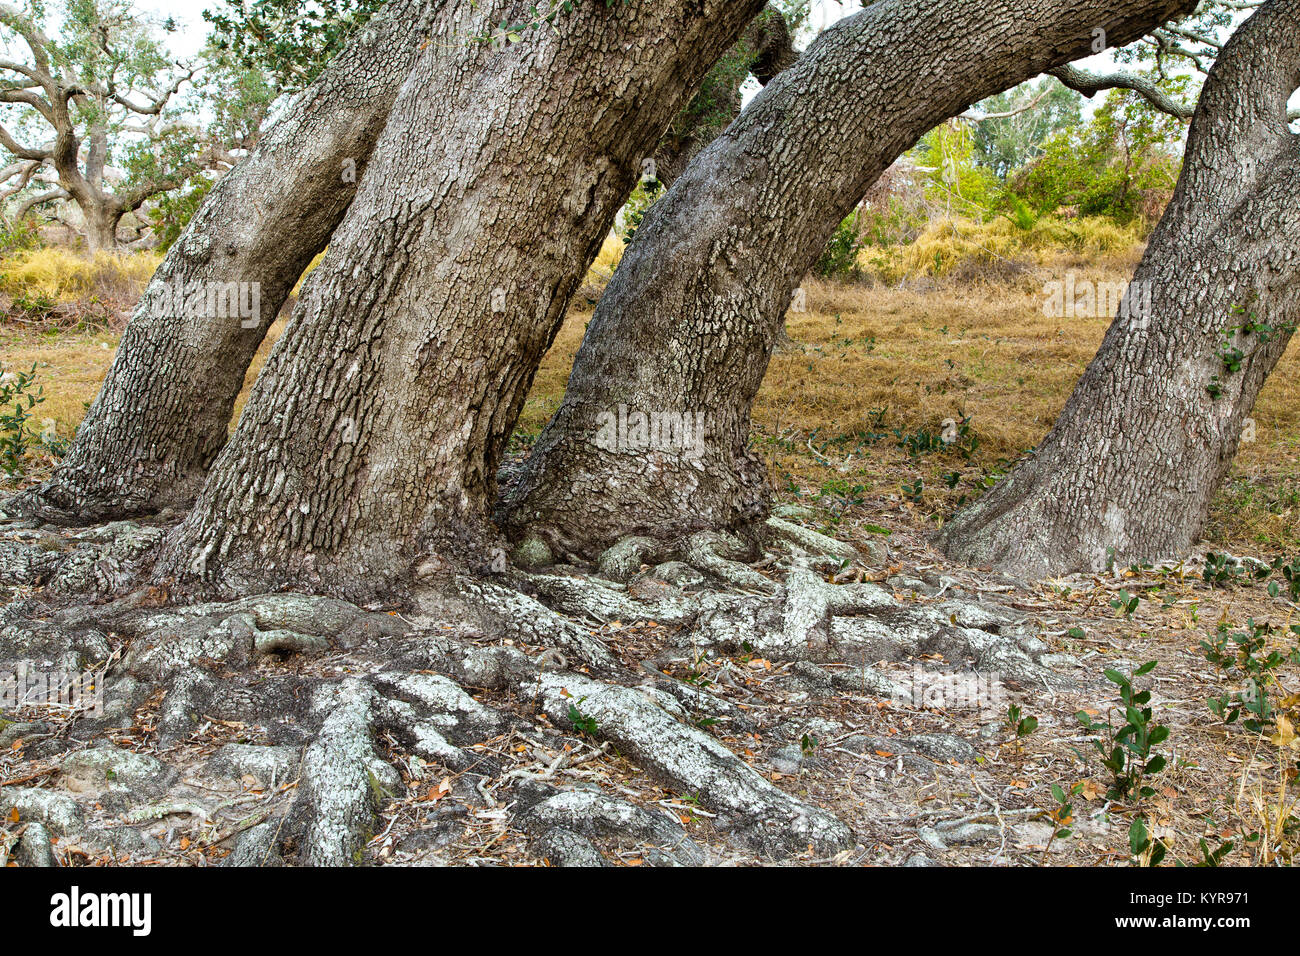 Grove of Coastal Live Oak trees displaying exposed roots  'Quercus virginiana'  Goose Island State Park. Stock Photo